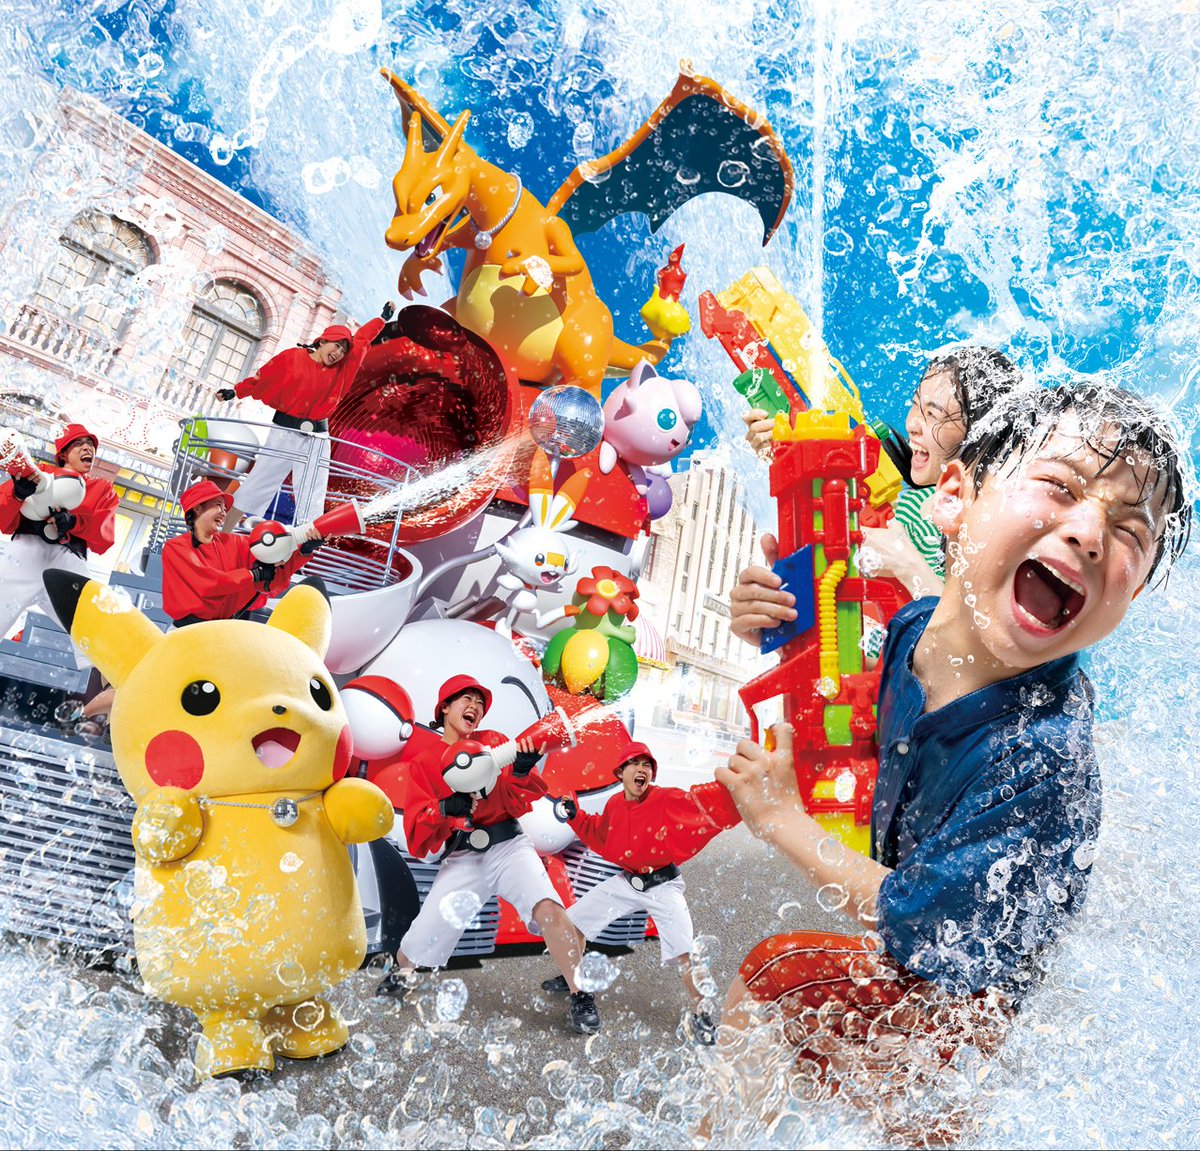 Serebii Update: Universal Studios Japan to feature Pokémon in the summer NO Limit Summer Splash Parade including new floats such as Gyarados which will spray water. Runs from July 3rd through September 1st Details @ serebii.net